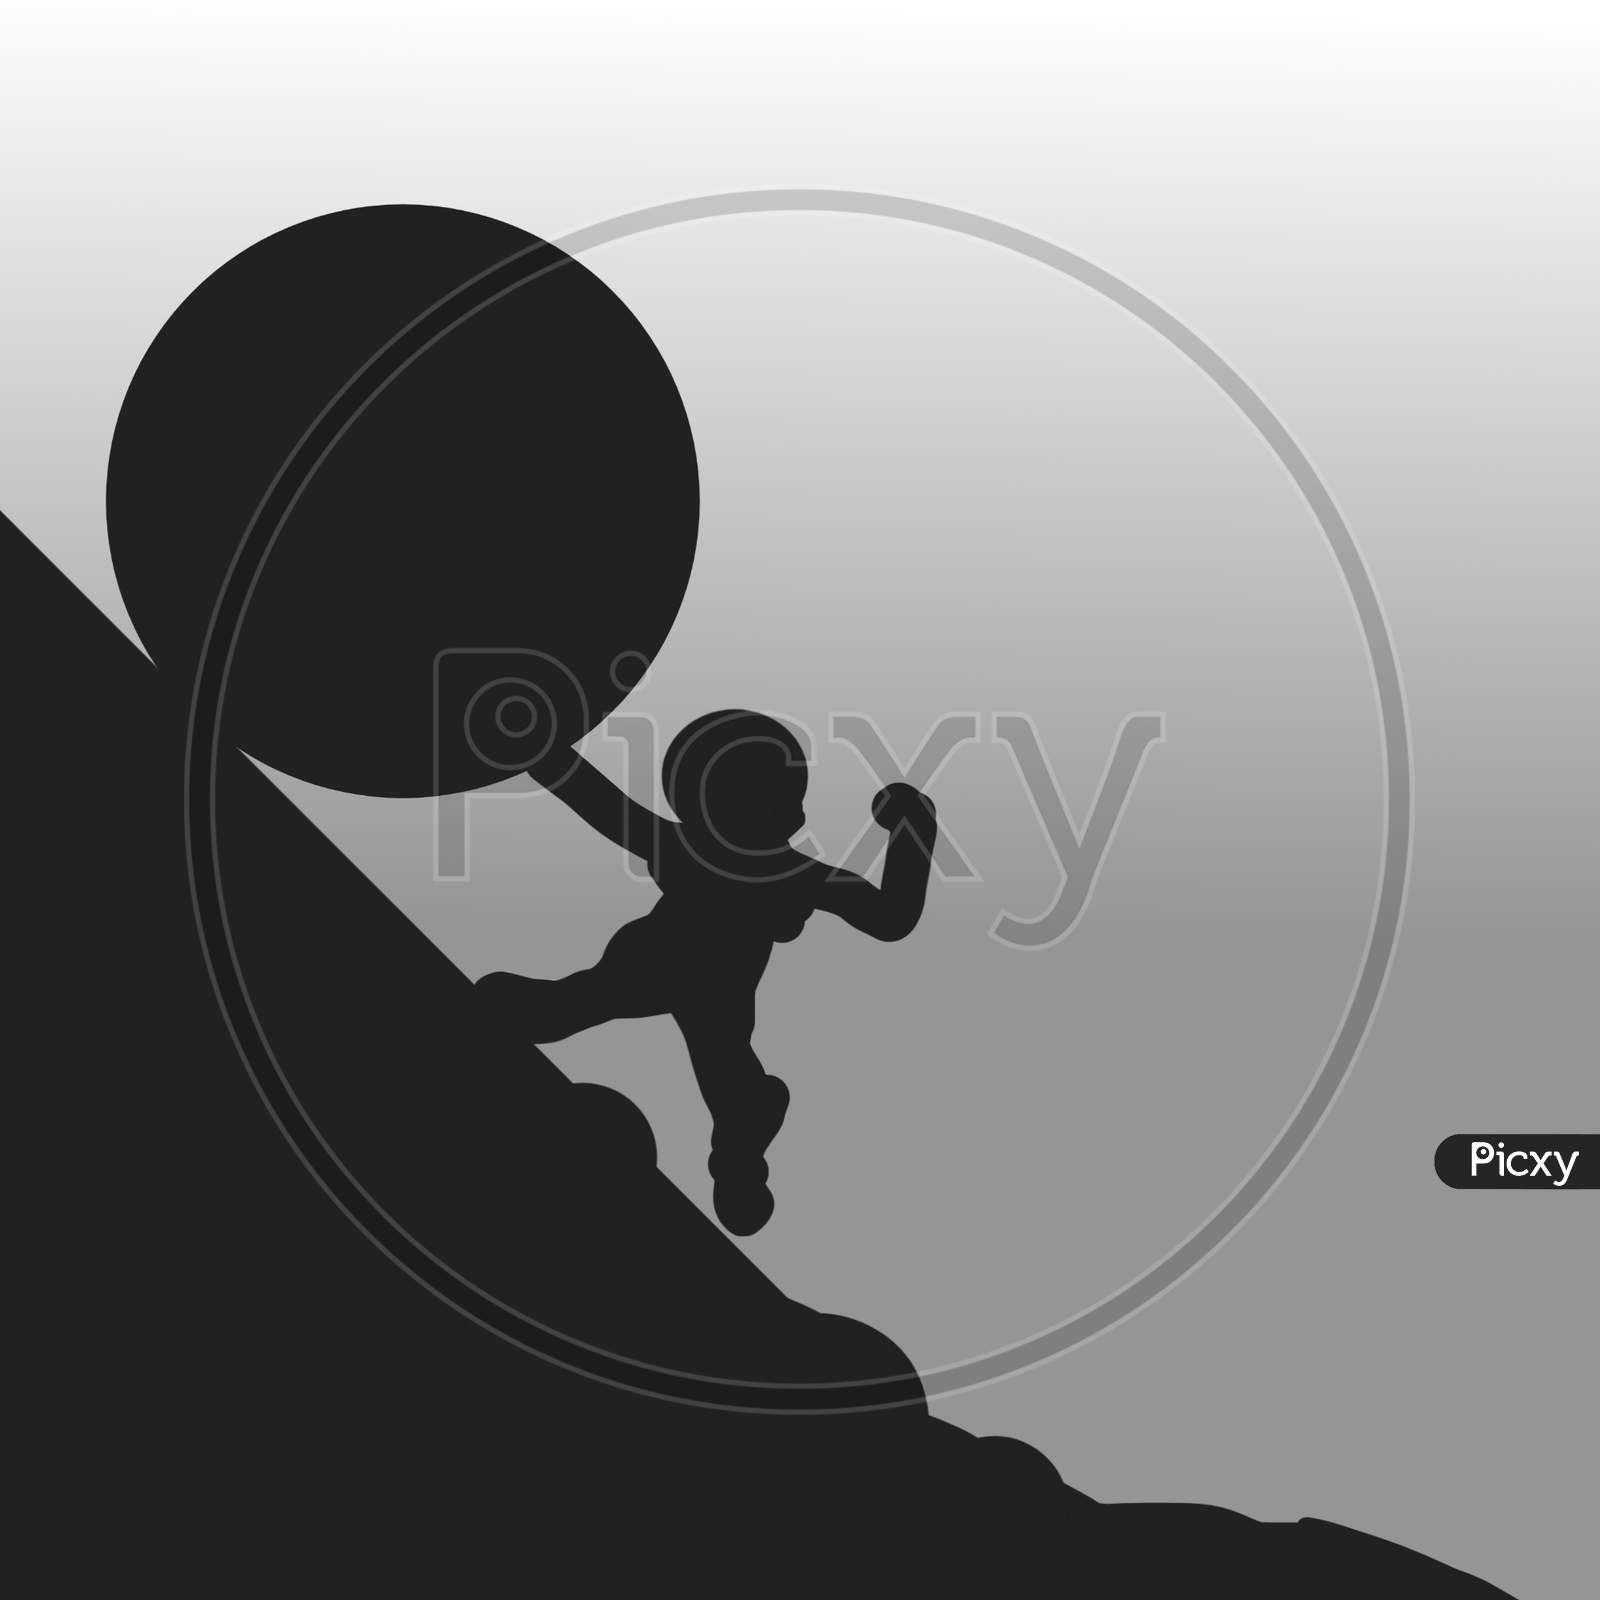 Beautiful digital art of a person lifting a huge stone in uphill shows hard work is the key to success